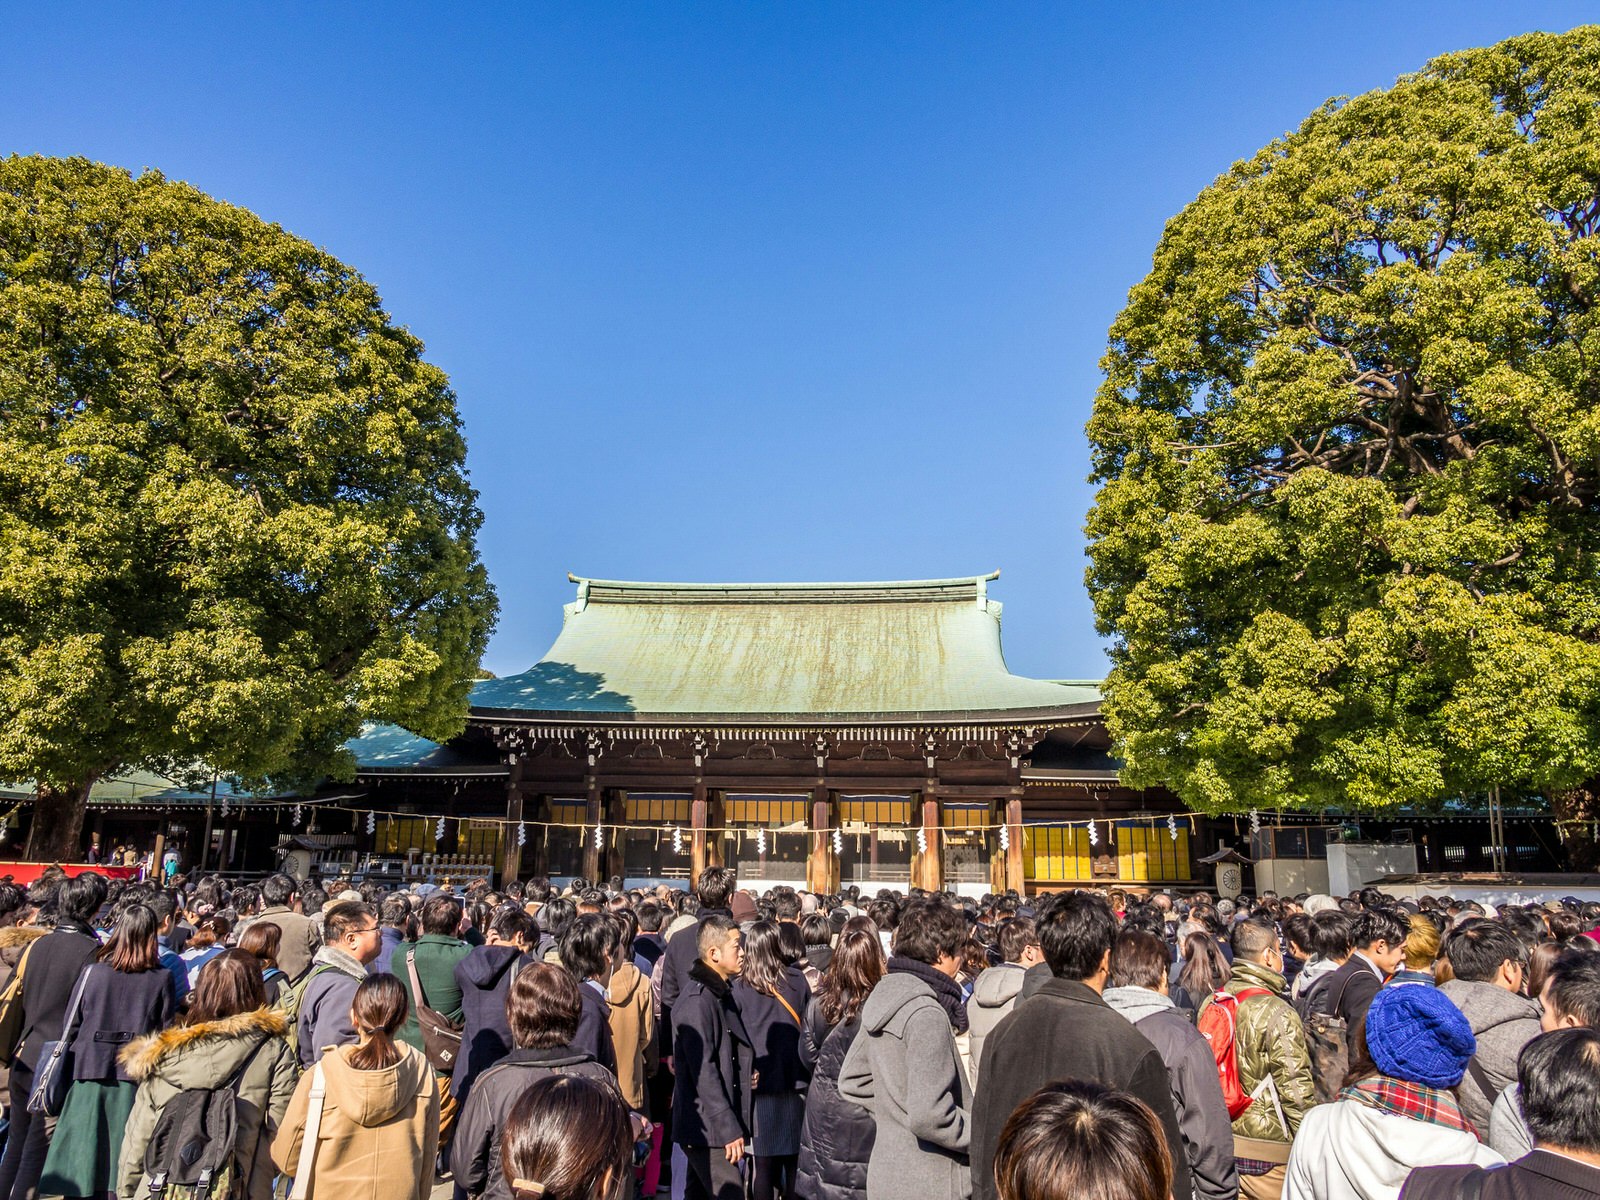 A large crowd gathered in front of the shrine Meiji-jingū in Tokyo on a clear winter day